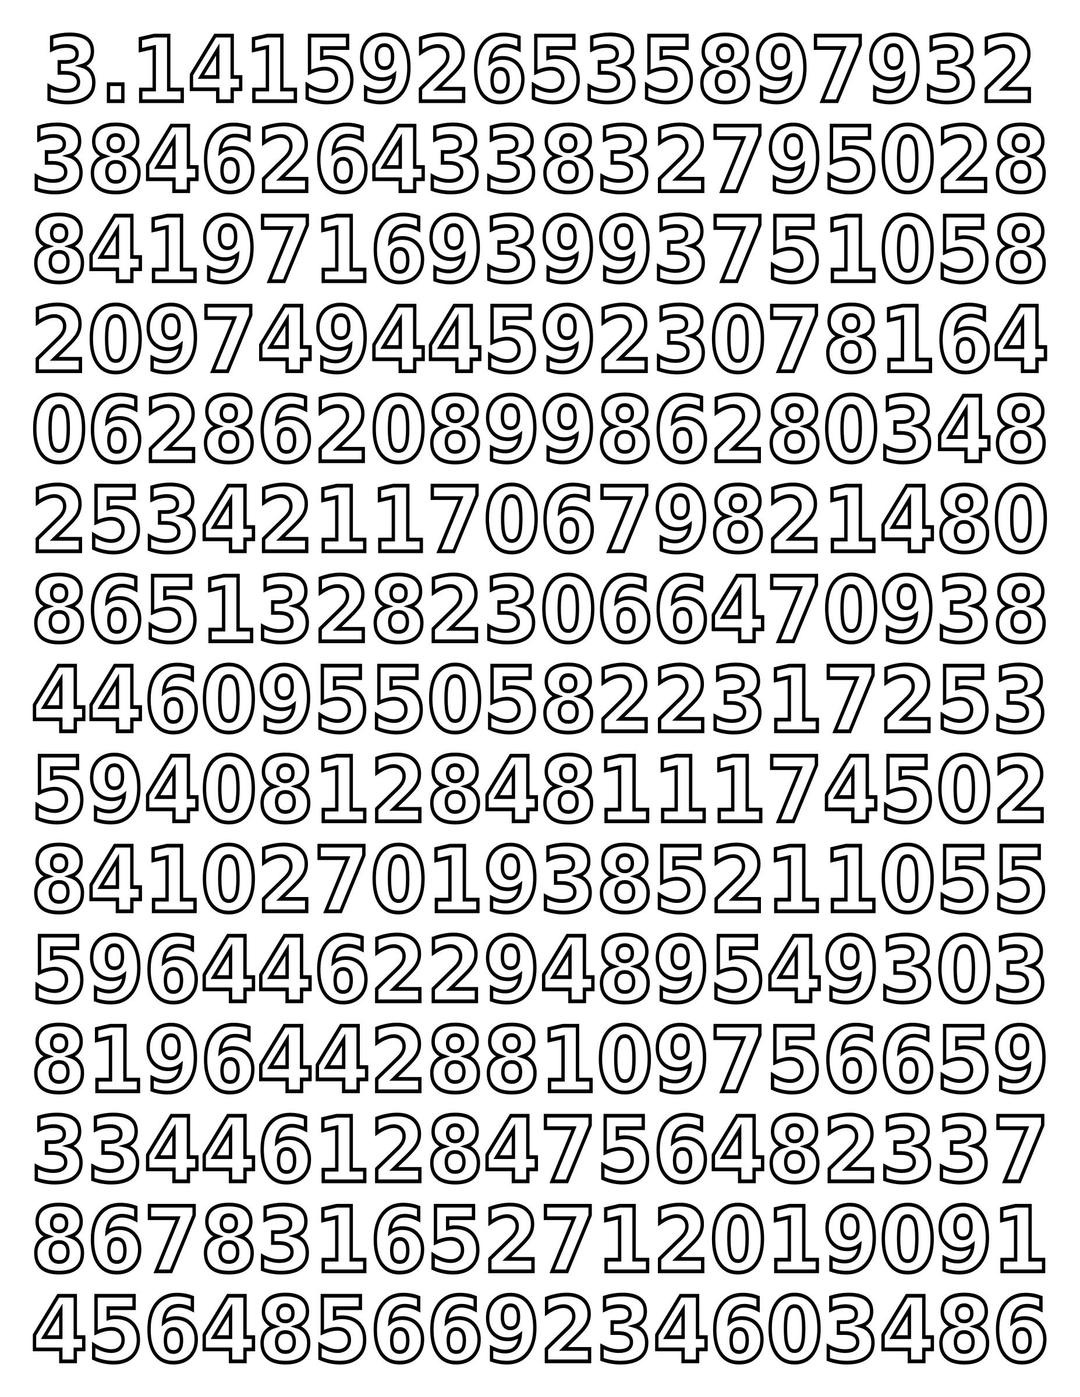 Coloring page - pi day digits of pi small png transparent